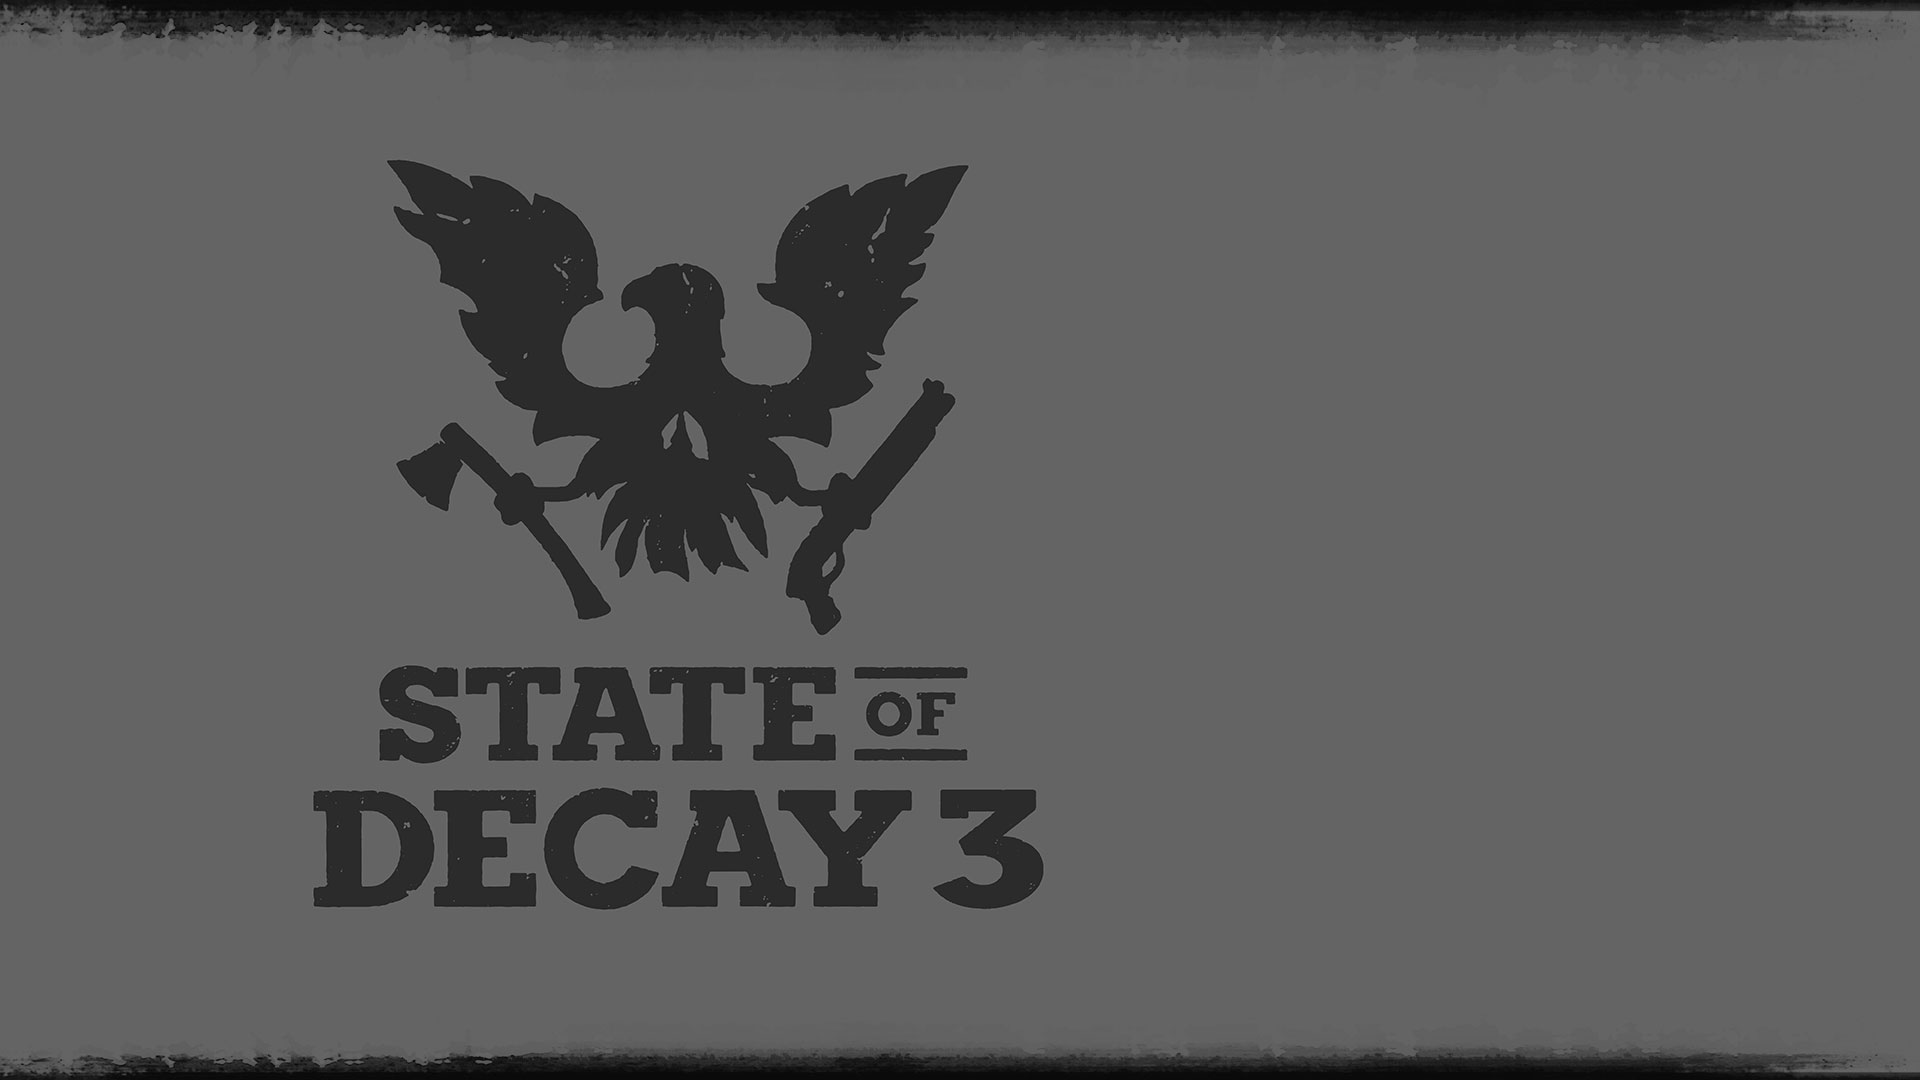 State of Decay 3 logo